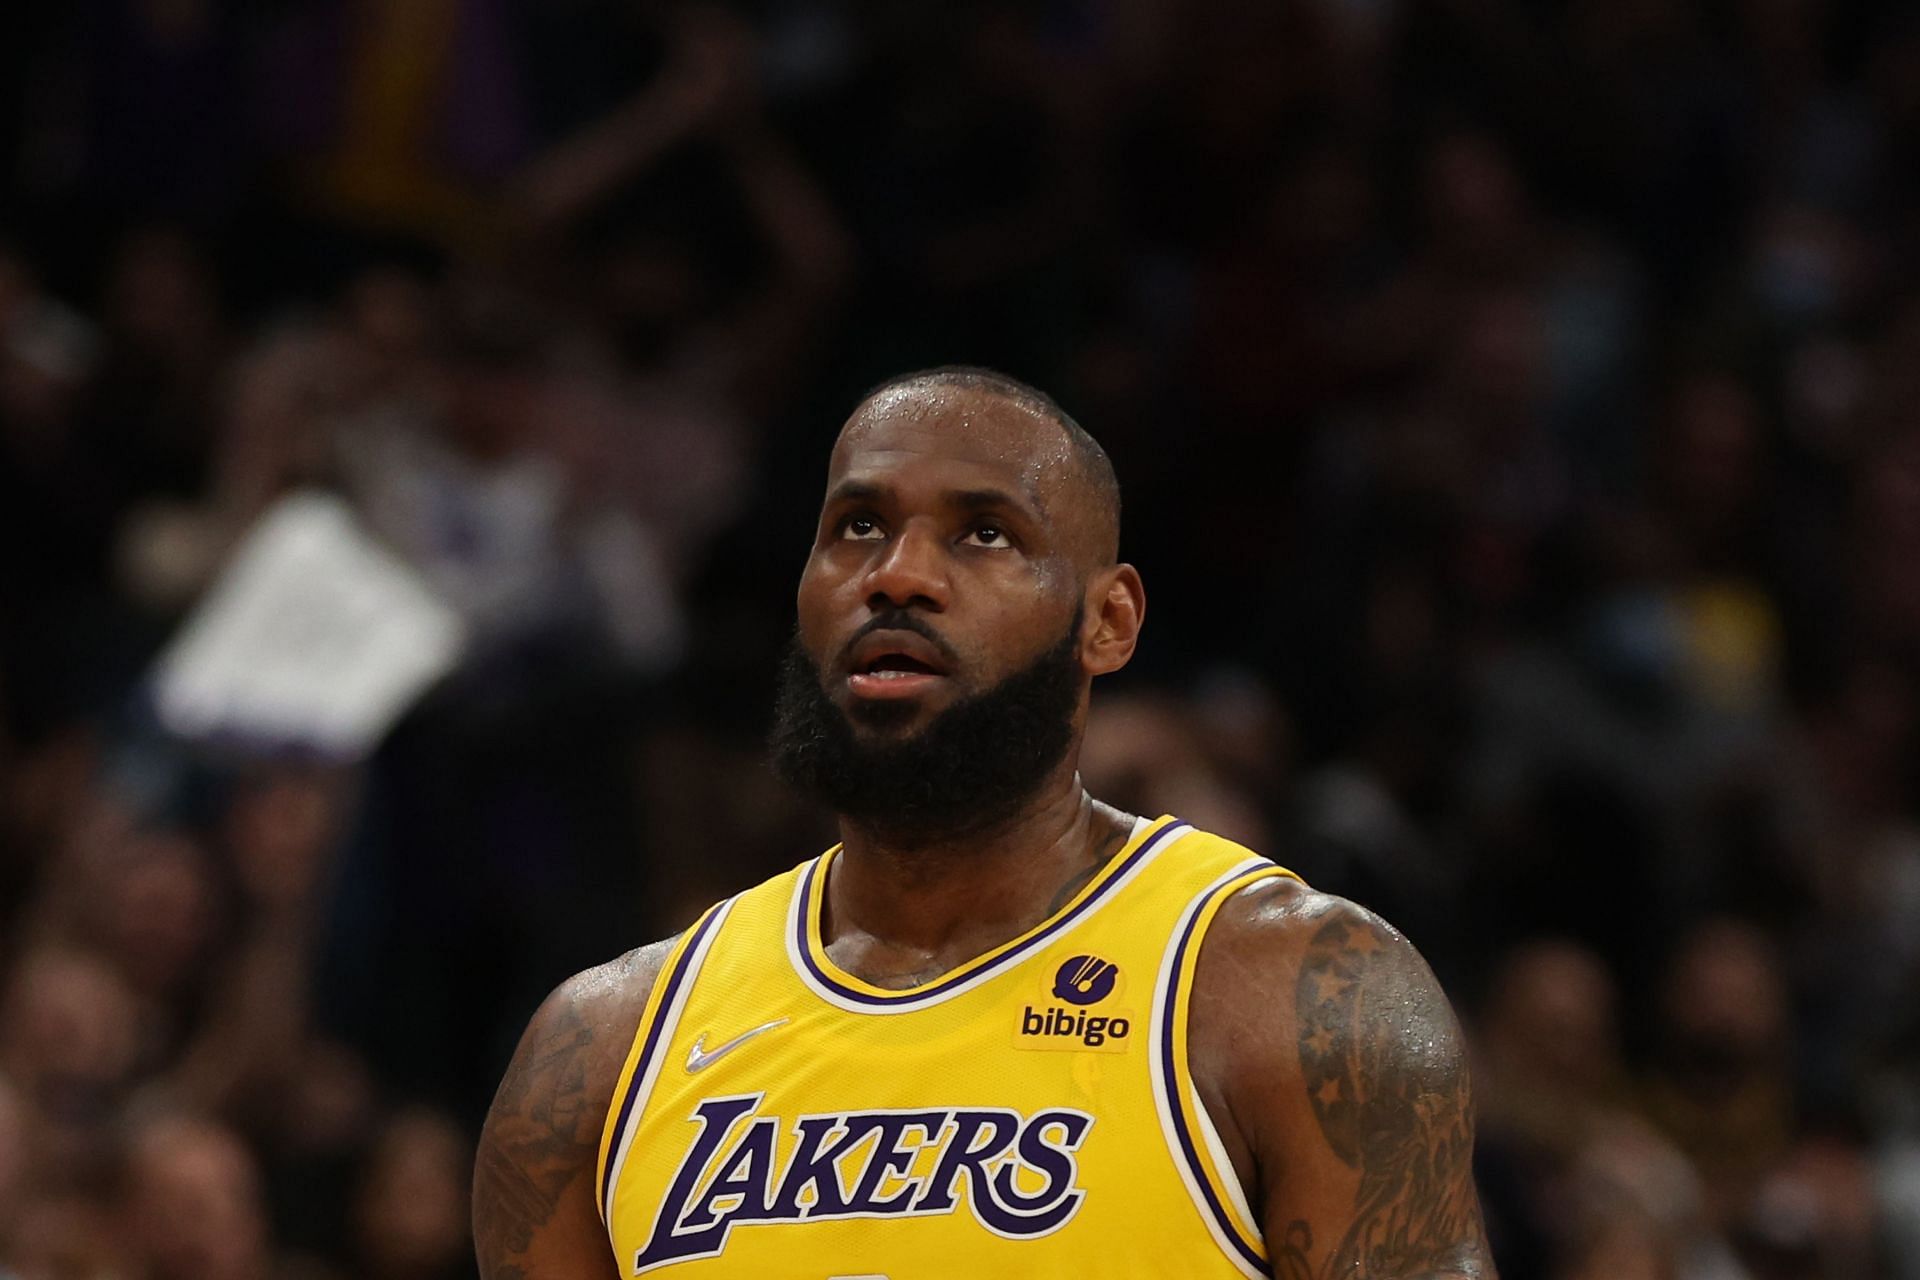 LeBron James makes bold statement that should scare opponents - NBC Sports